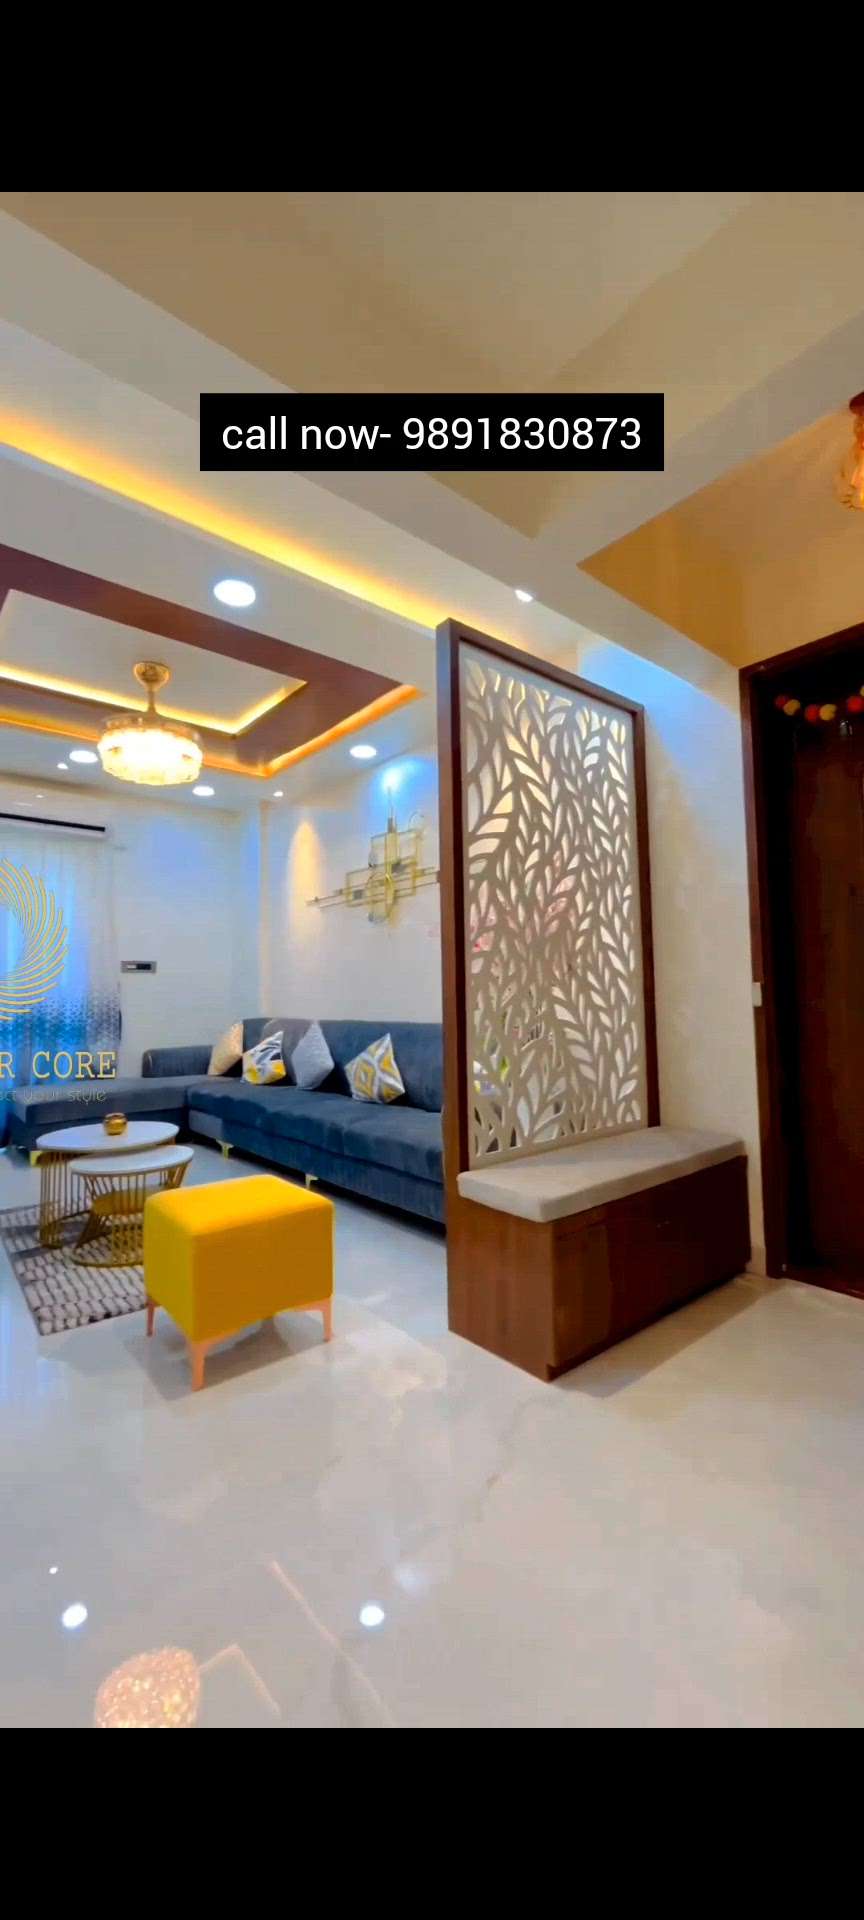 Morden Interior design project by @interior_core ❤️
Location -Faridabad. 
total cost - 21 lakhs 

we are a service provider in Delhi NCR. 

Contact us - +91-9891830873 ✅☎️
more info - www.interiorcore.in 

#turnkeyprojects
#homerenovation
#interiordesign 🏠
#interiorcompanygurgaon 
@interior_core